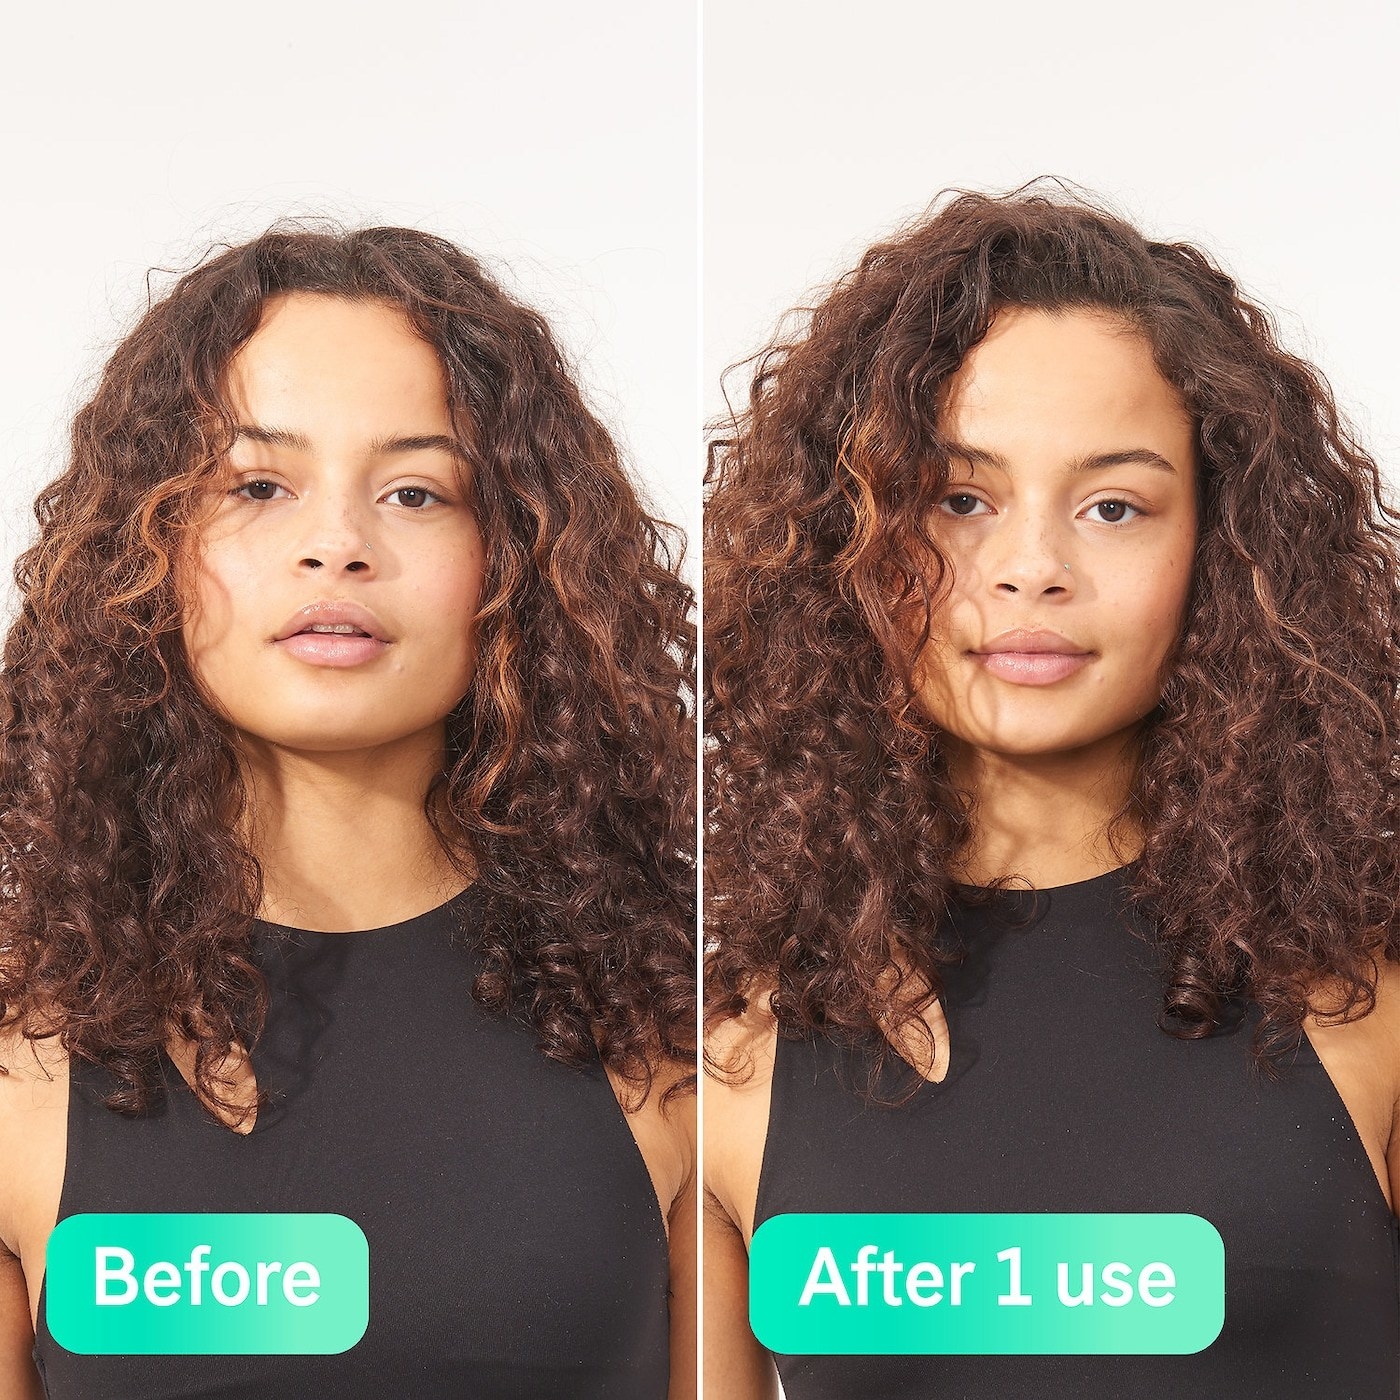 a before and after where the after shows hair that is noticeably smoother, less frizzy, with more volume